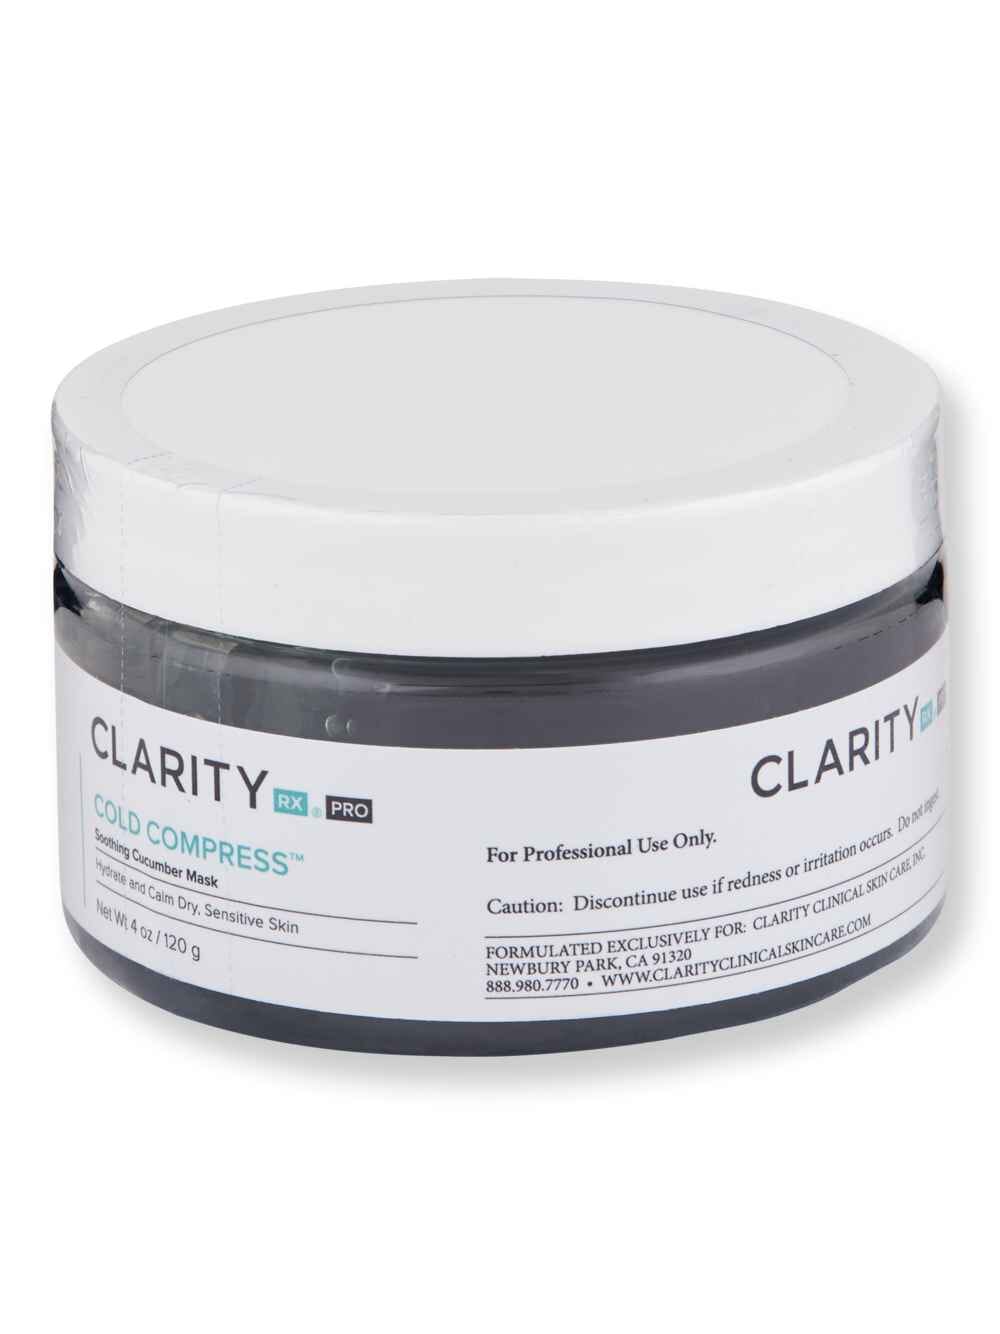 ClarityRx ClarityRx Cold Compress Soothing Cucumber Mask 4 oz Face Masks 